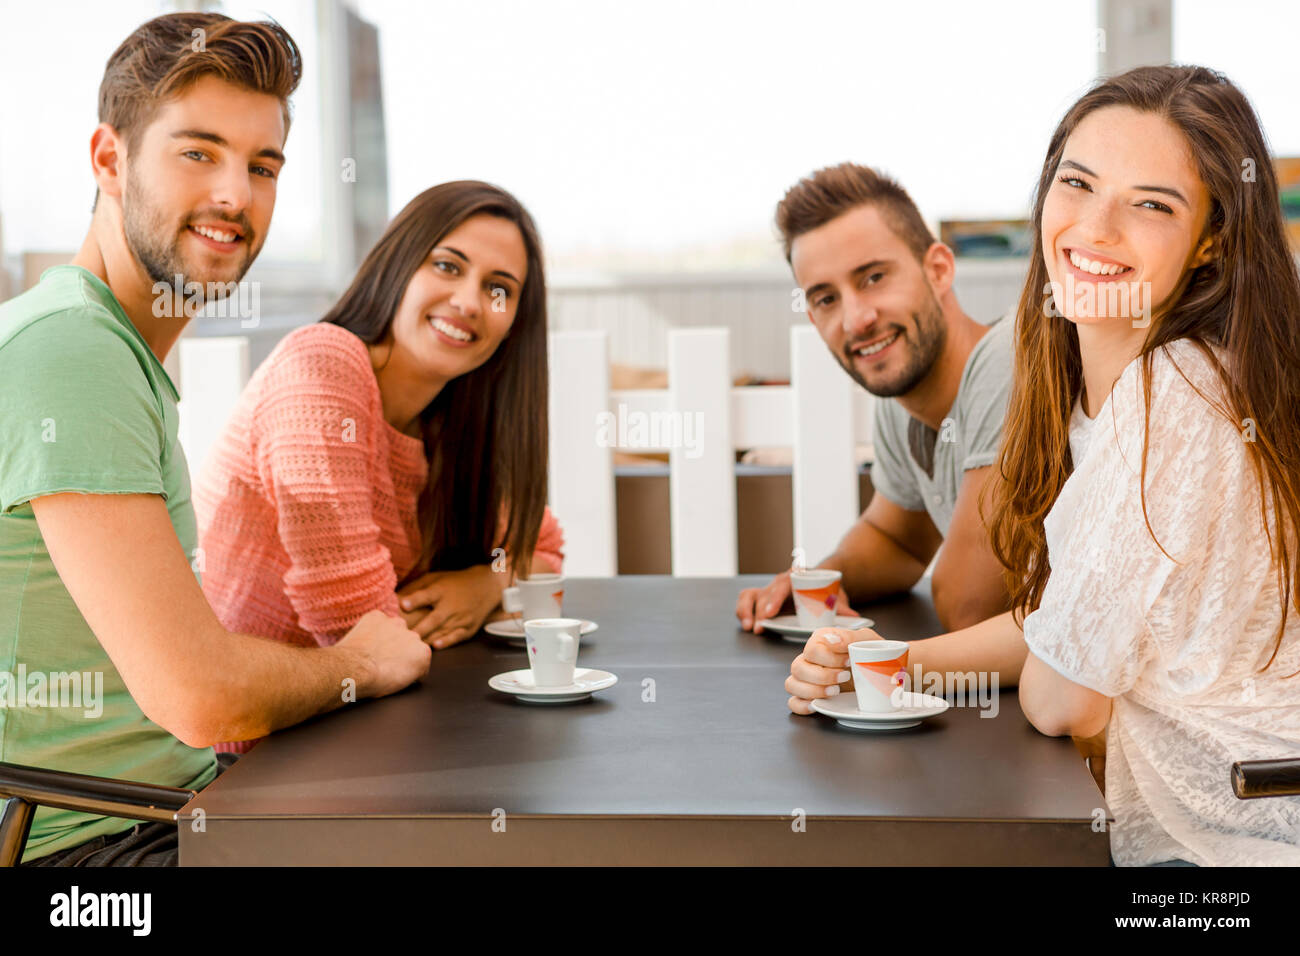 A coffee with friends Stock Photo